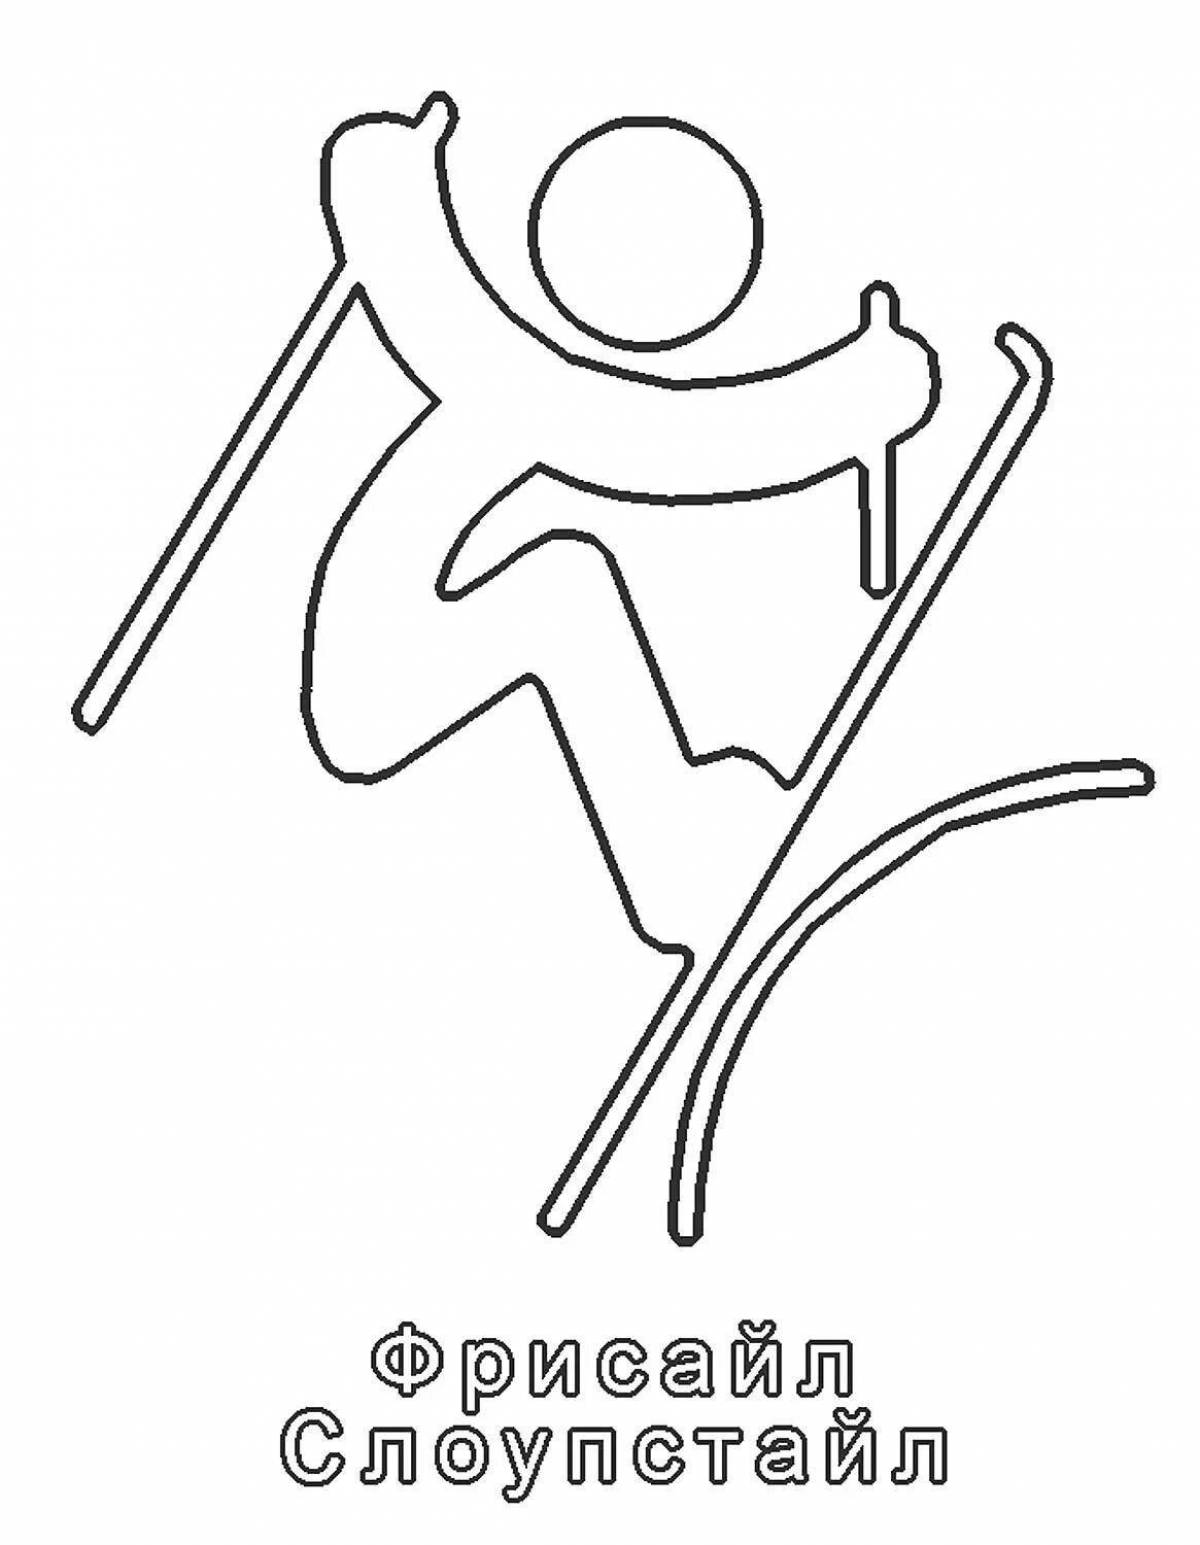 Glowing olympic winter sports coloring page